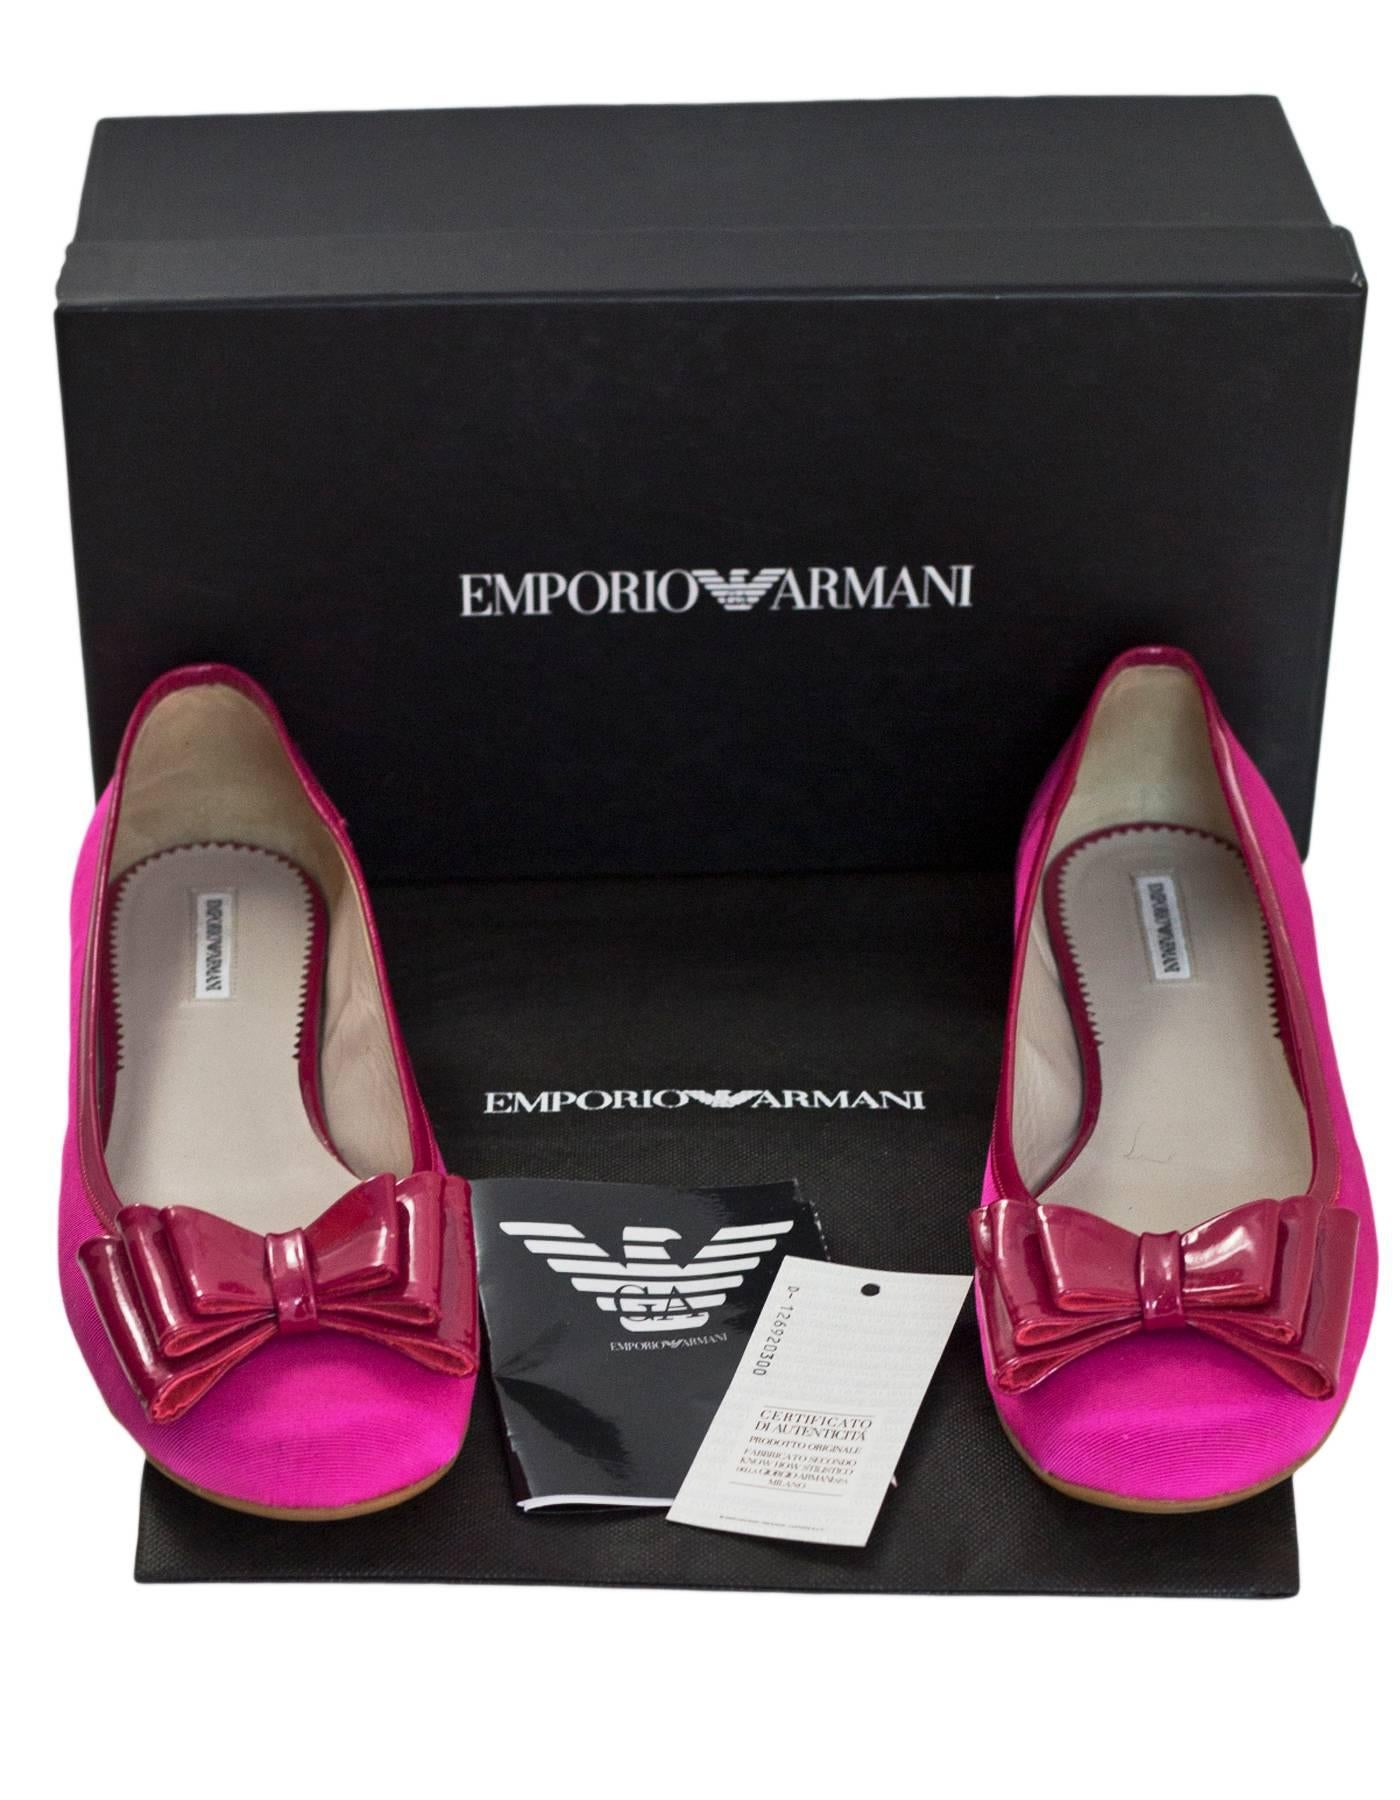 Emporio Armani Pink Ballet Flats with Bow Sz 39 with Box, DB 2